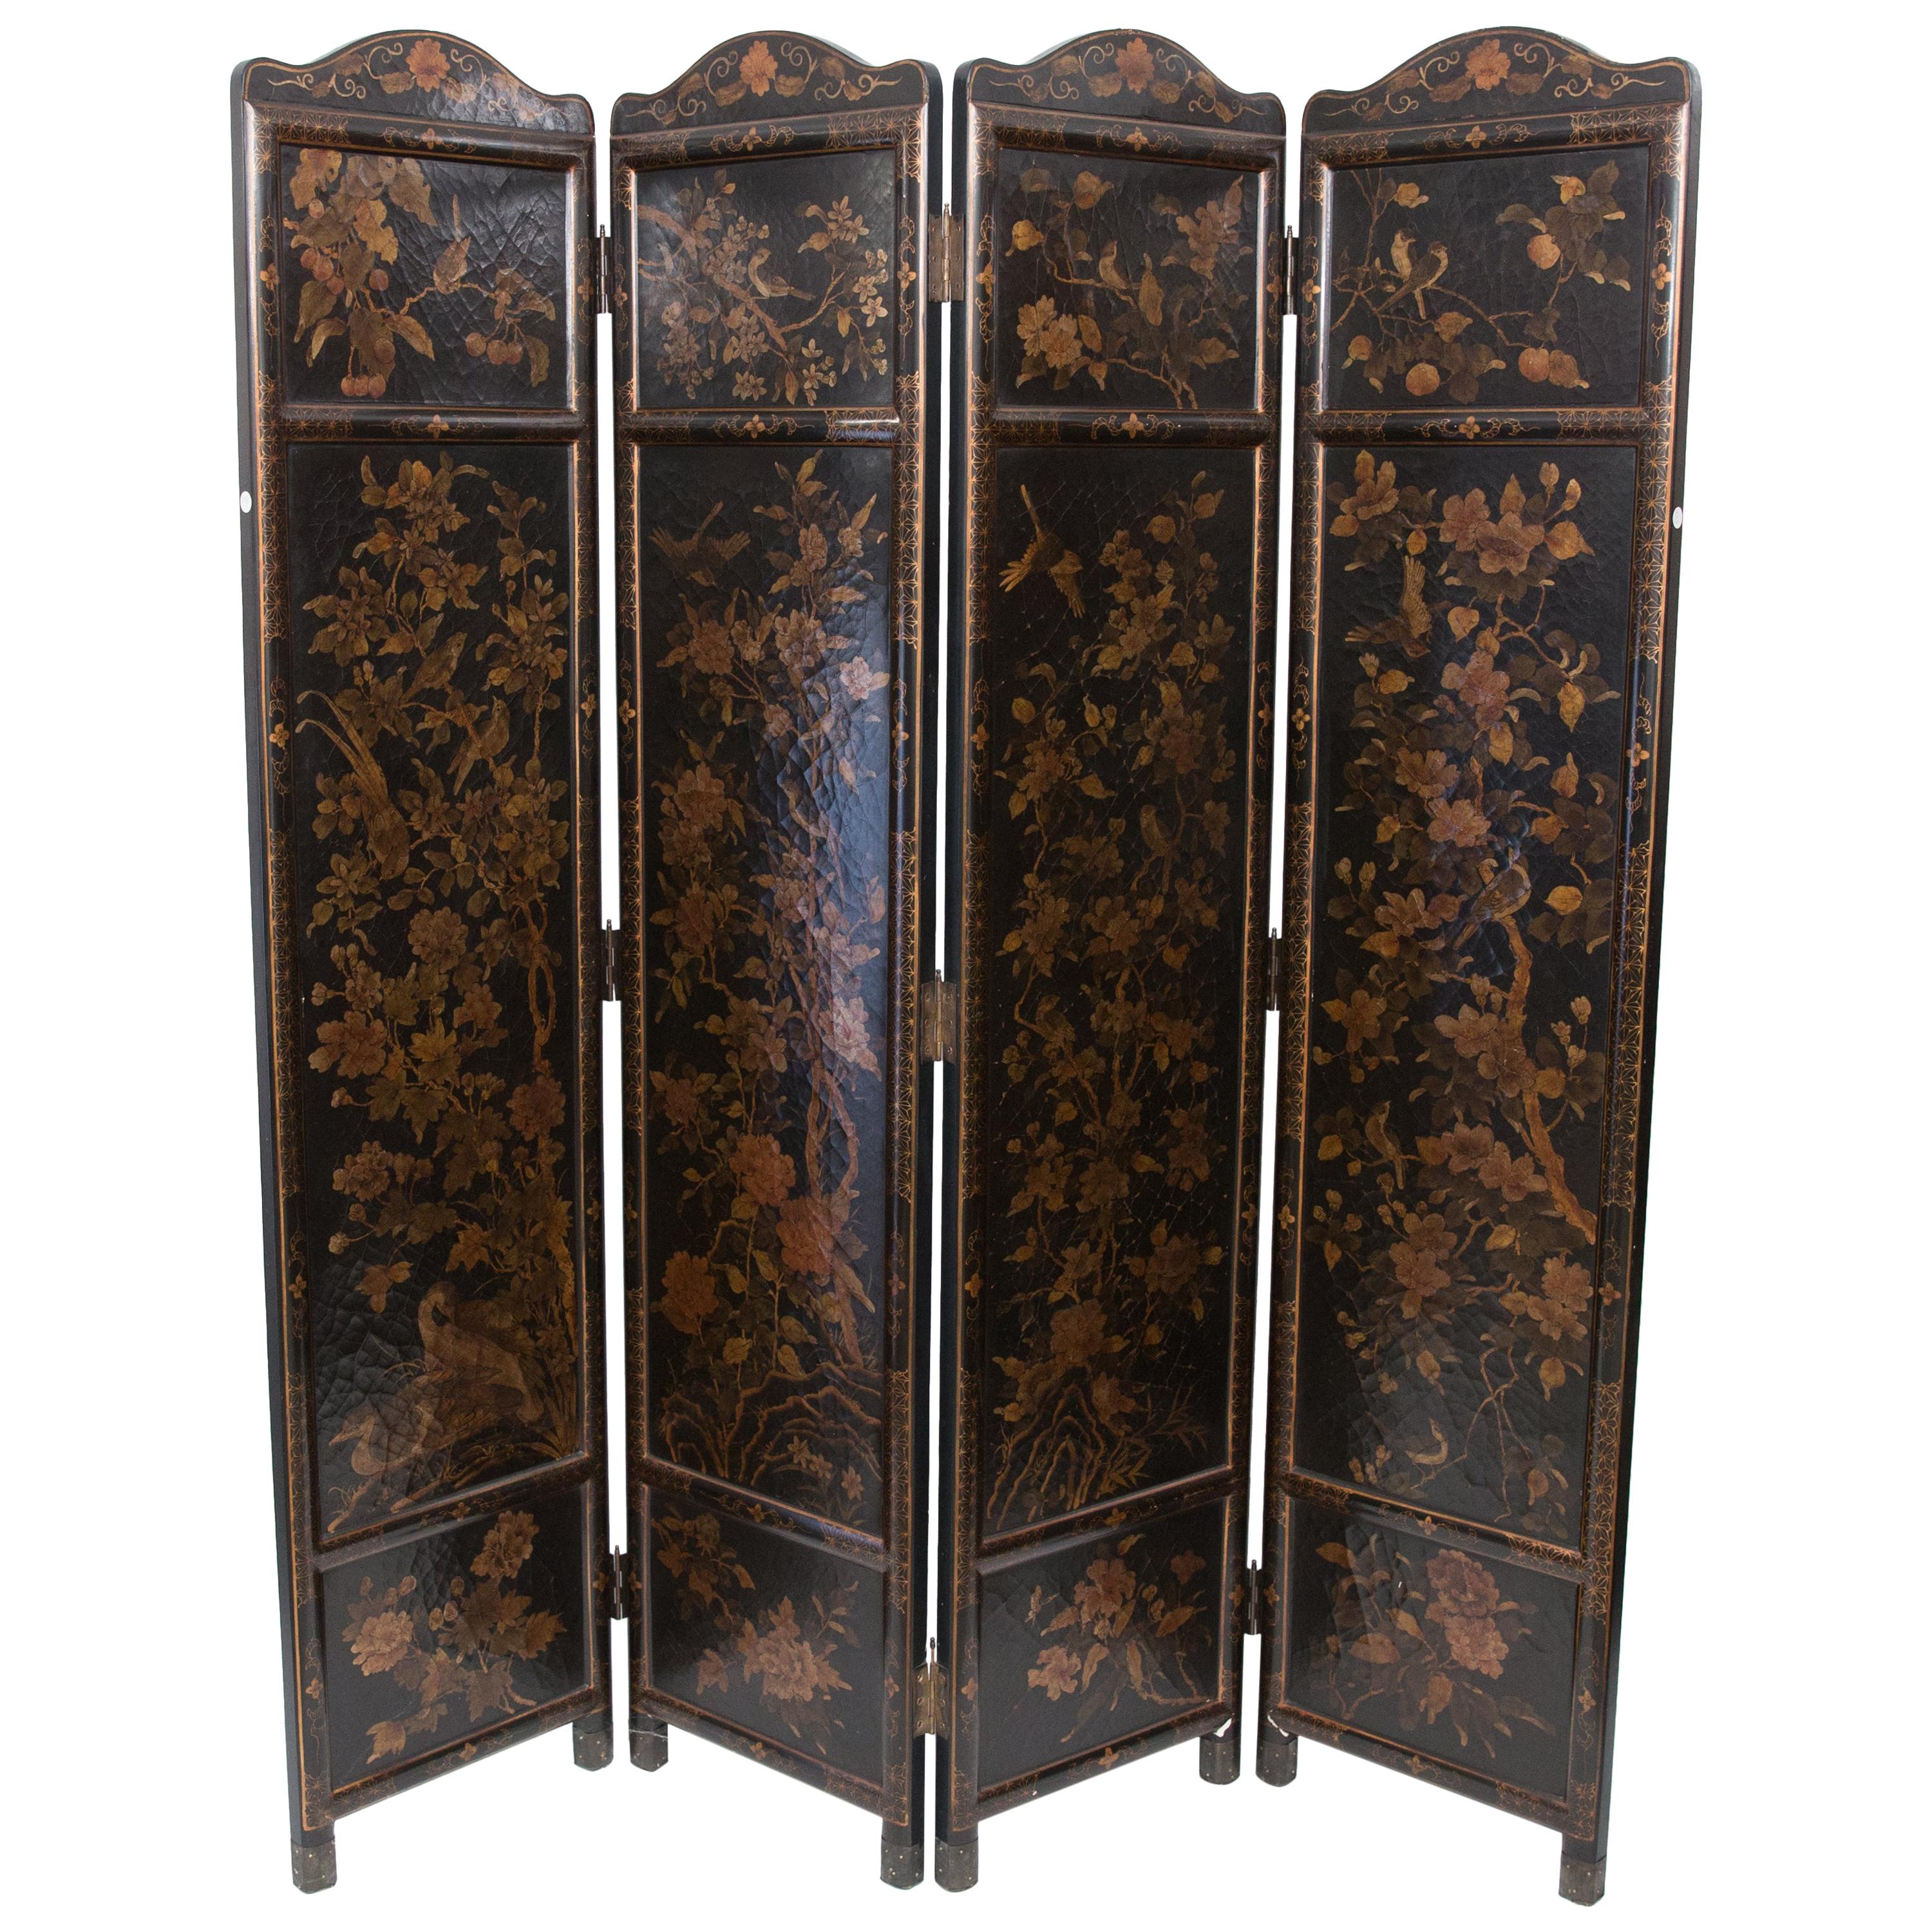 Japanese Meiji 4-Fold Screen Hand Painted Depicting Birds and Foliage